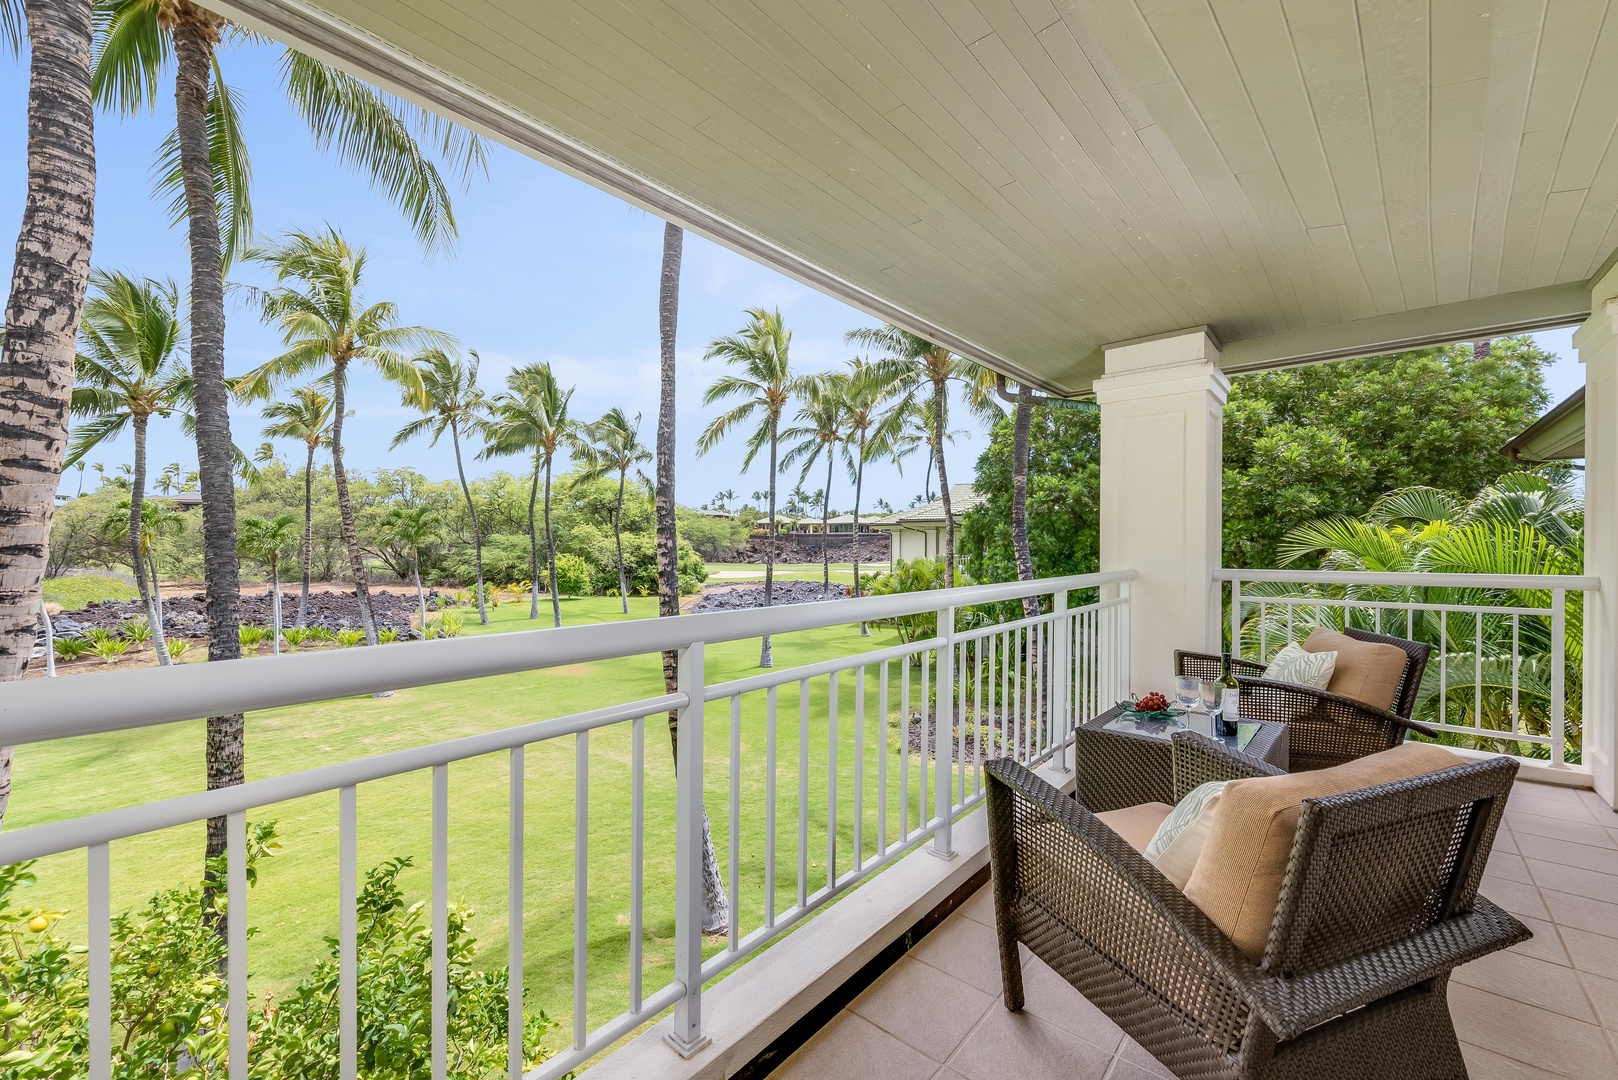 Kamuela Vacation Rentals, The Islands D3 - Enjoy Tropical Breezes From Your Private Lanai Off Primary Bedroom